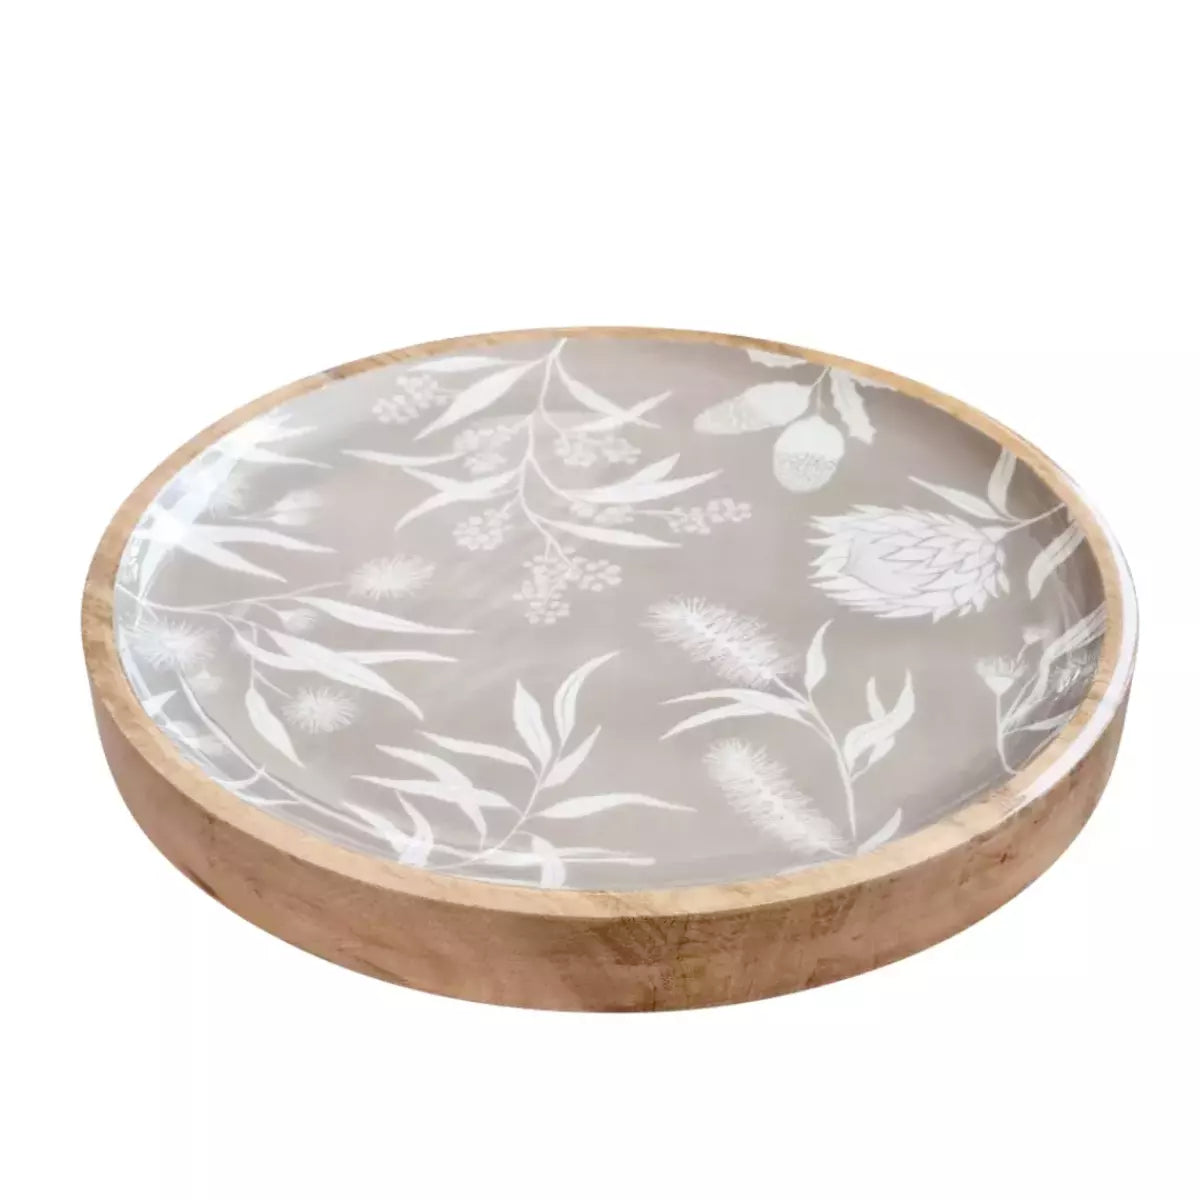 A Bindi Round Serving Tray with a floral design, made from natural materials by j.elliot.